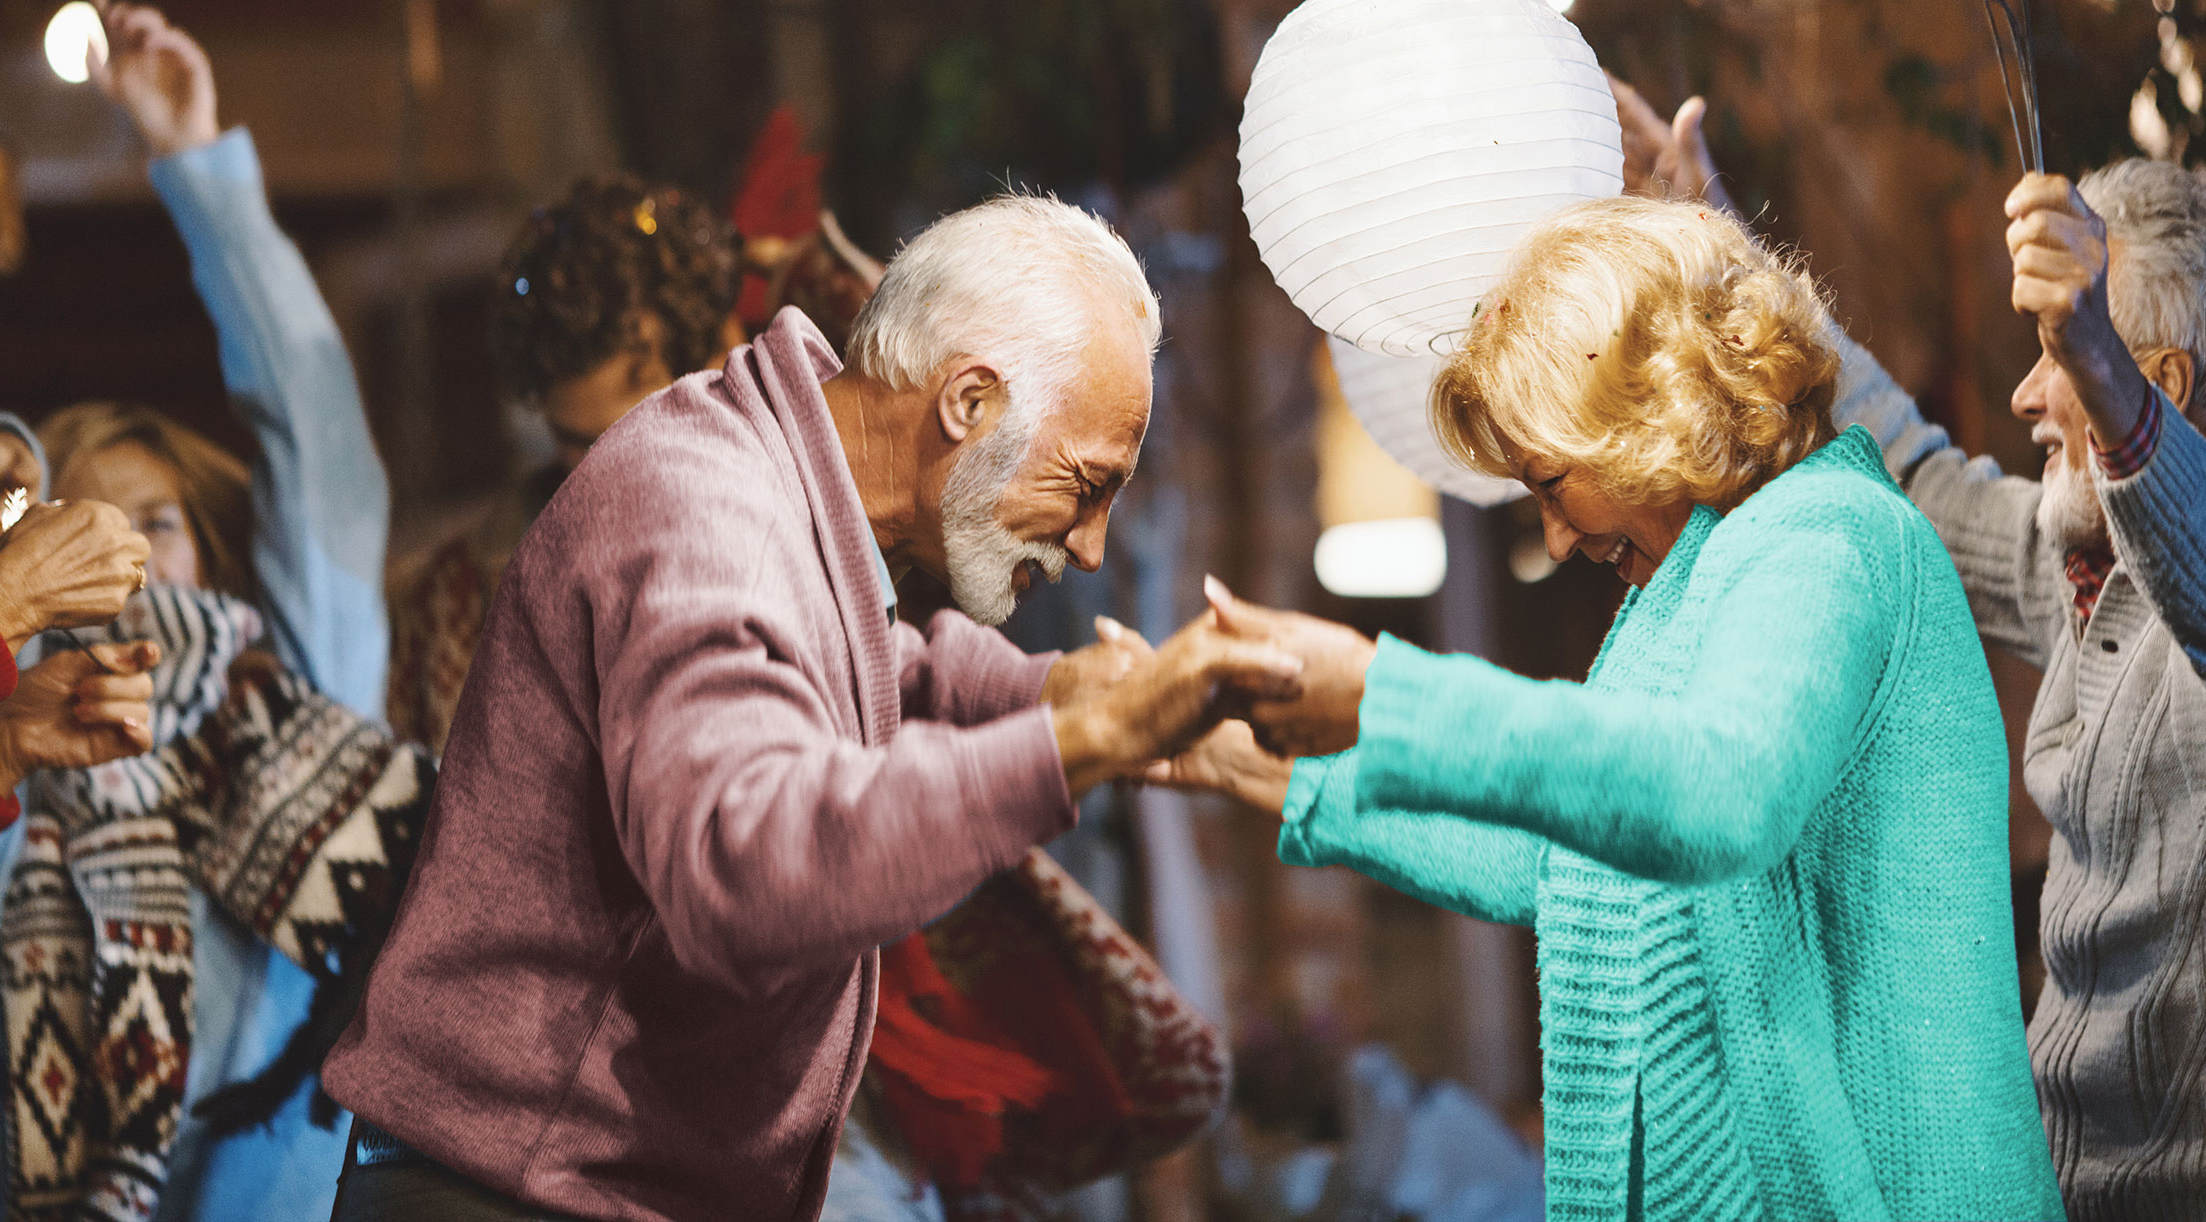 A senior couple dance and hold hands under the light of round lanterns.